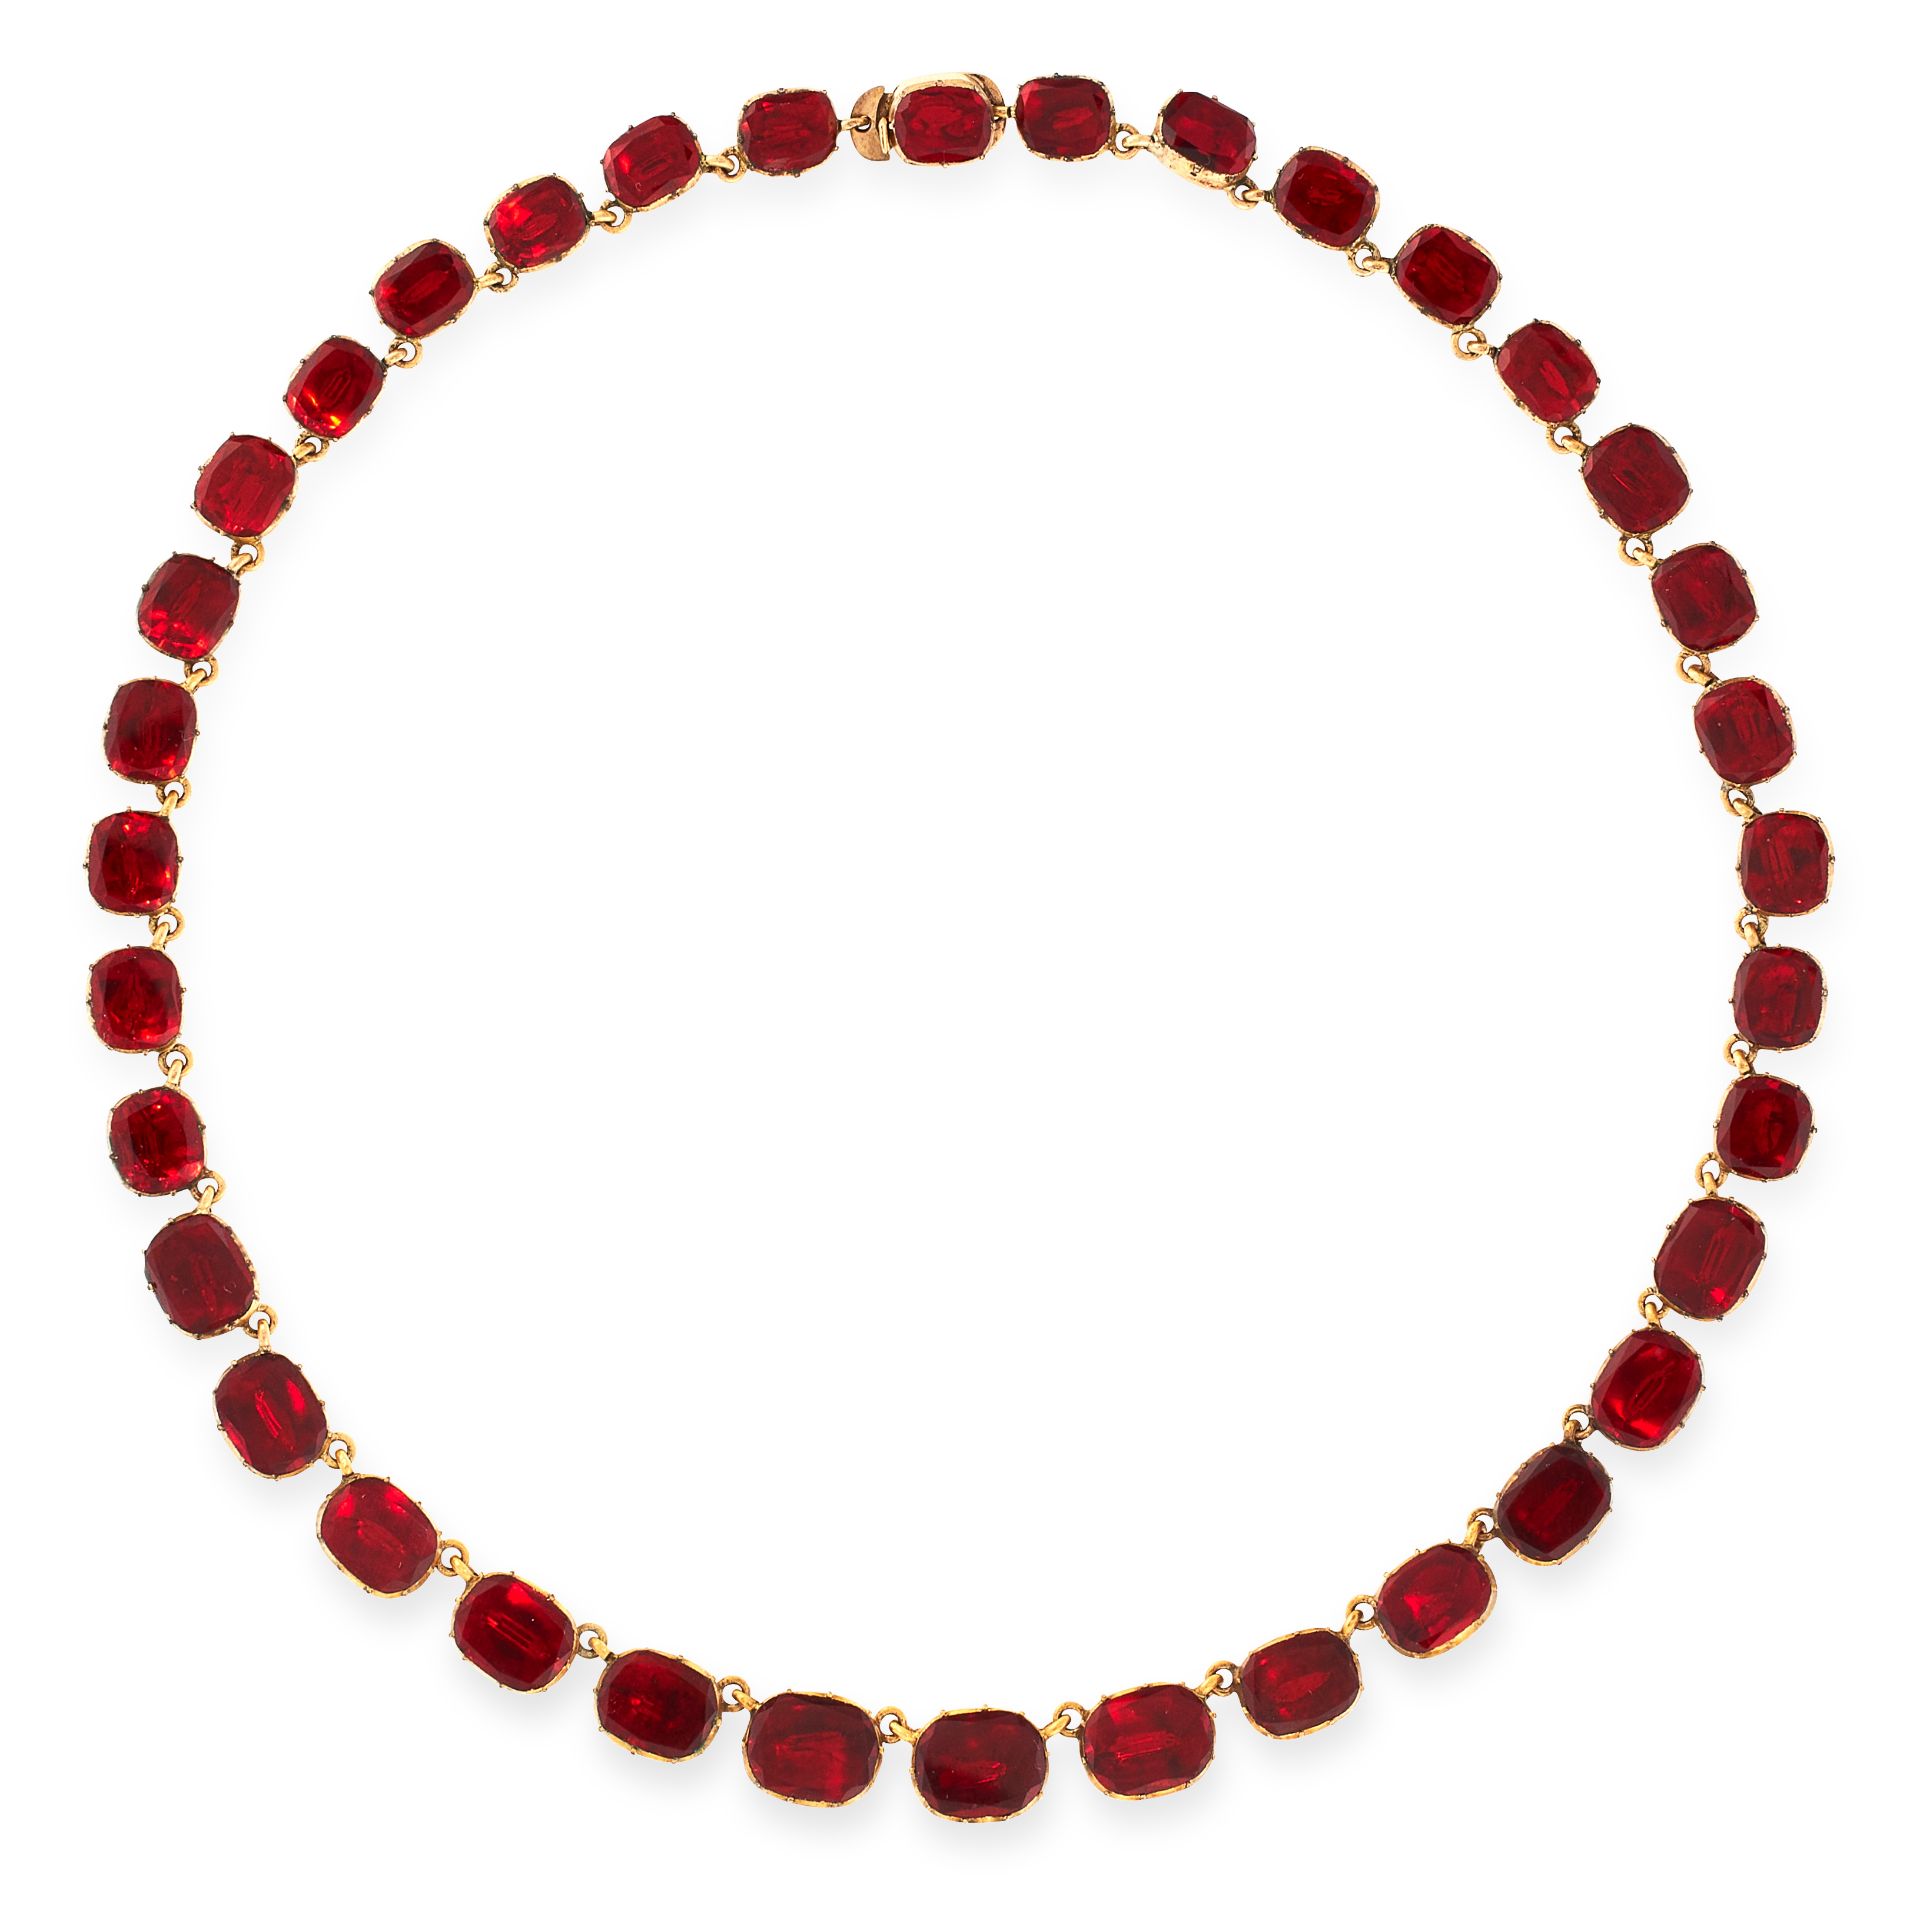 AN ANTIQUE PASTE RIVIERE NECKLACE, 19TH CENTURY comprising a single row of thirty-six graduated